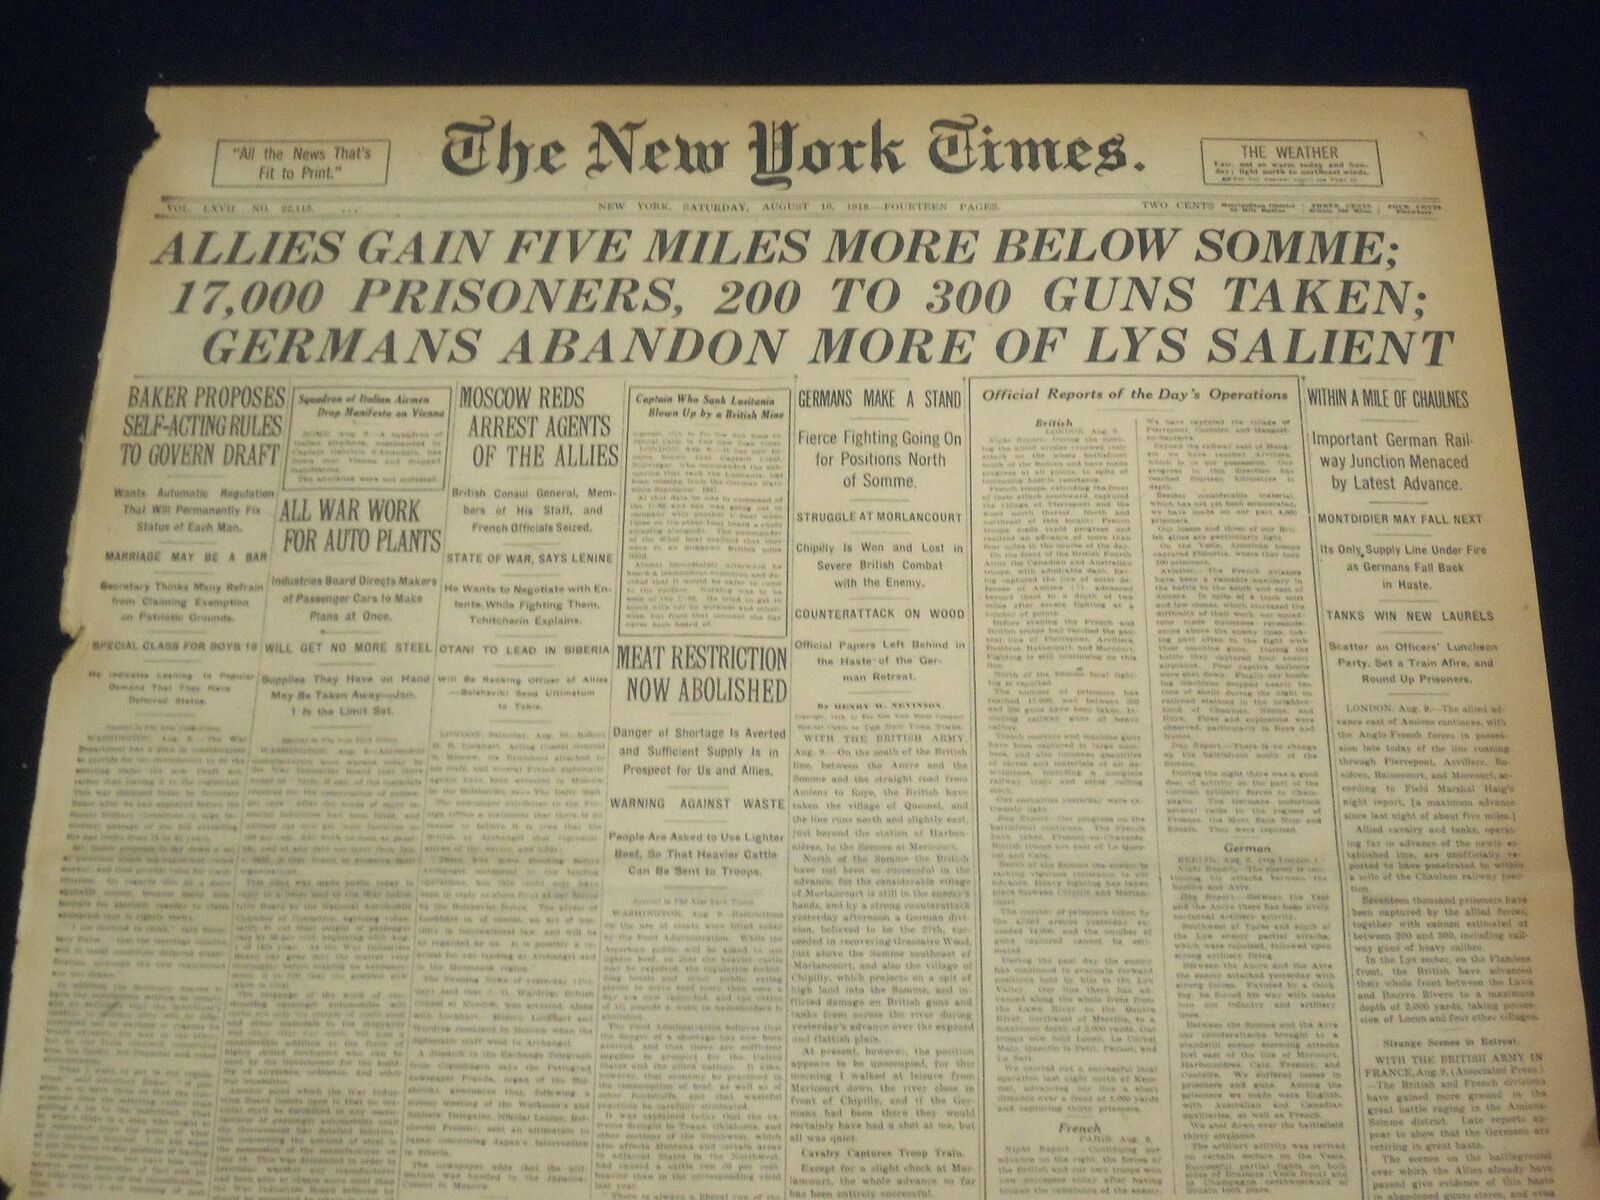 1918 AUGUST 10 NEW YORK TIMES - ALLIES GAIN FIVE MILES MORE - NT 9190